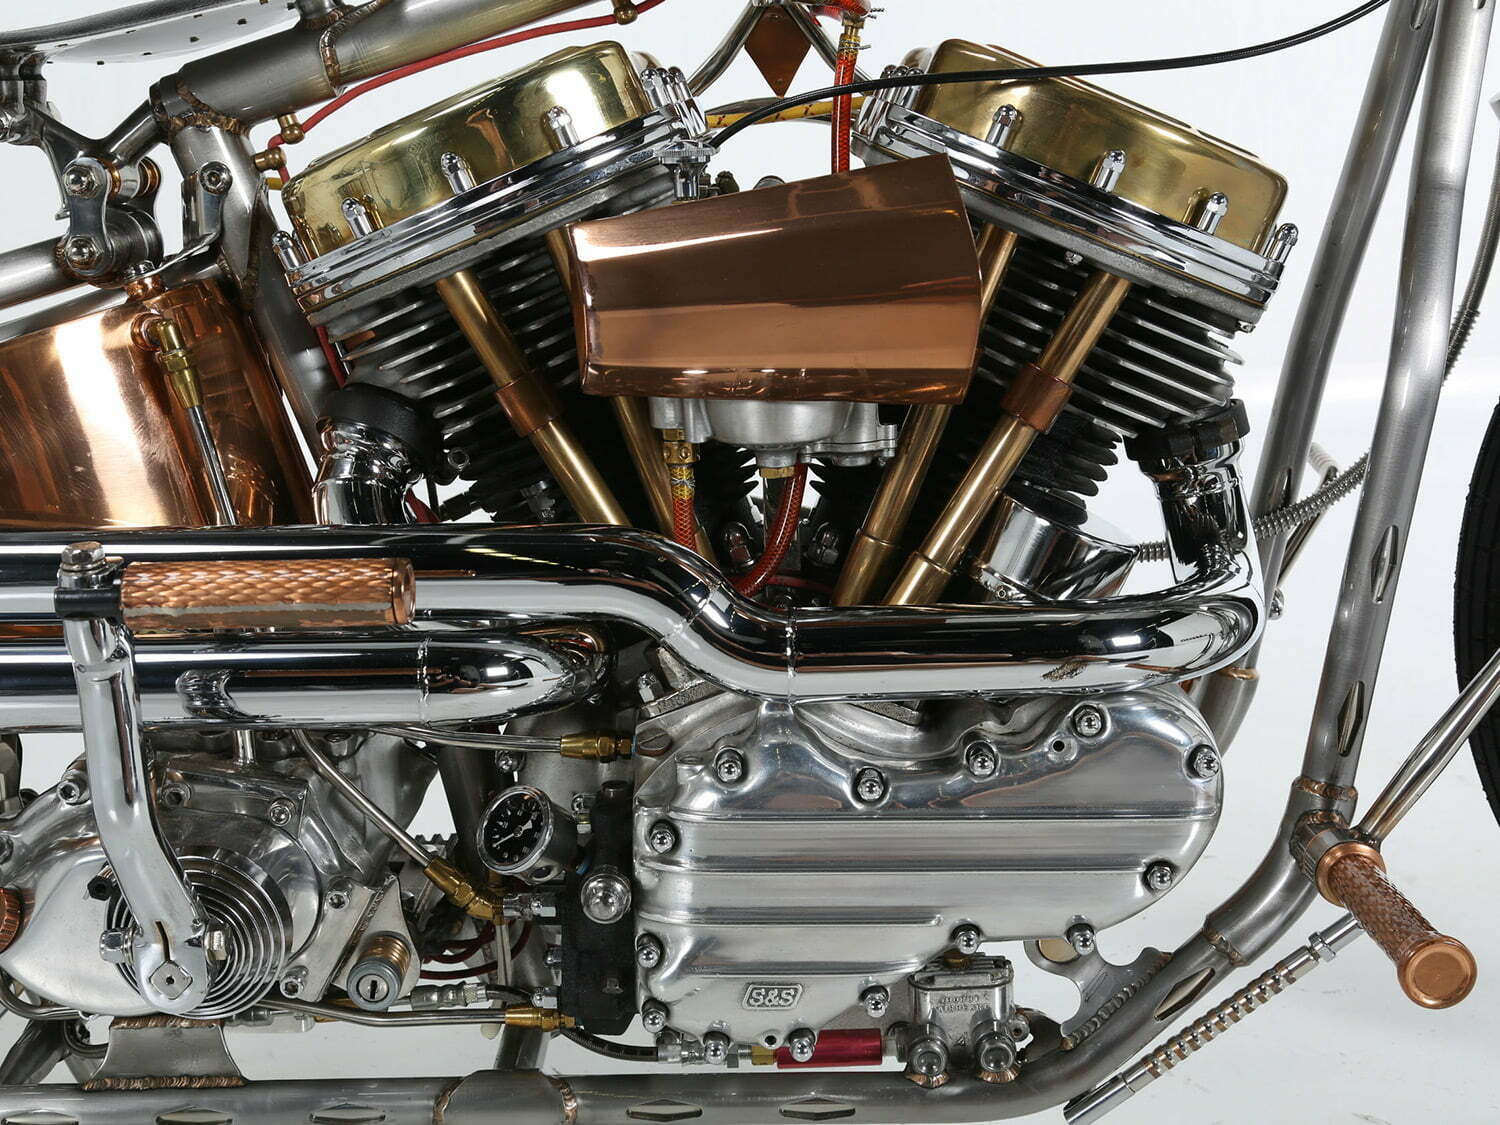 vintage 1959 Panhead with copper and brass accents